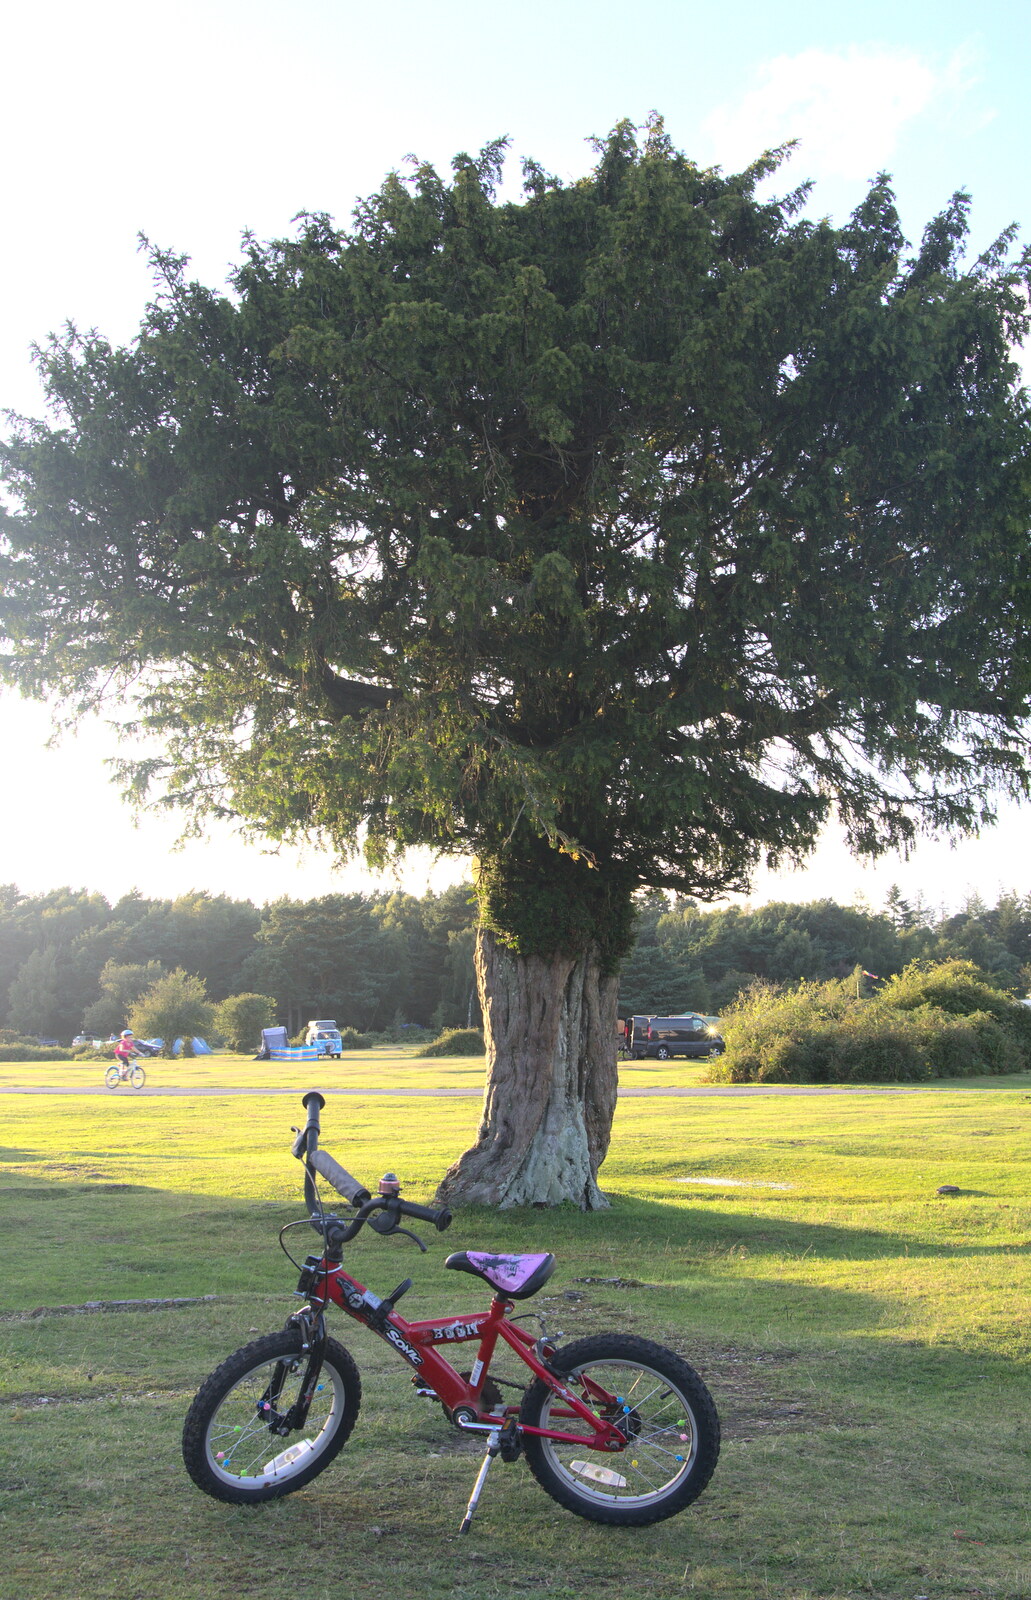 Fred's bike and a sunlit tree from Camping at Roundhills, Brockenhurst, New Forest, Hampshire - 29th August 2015